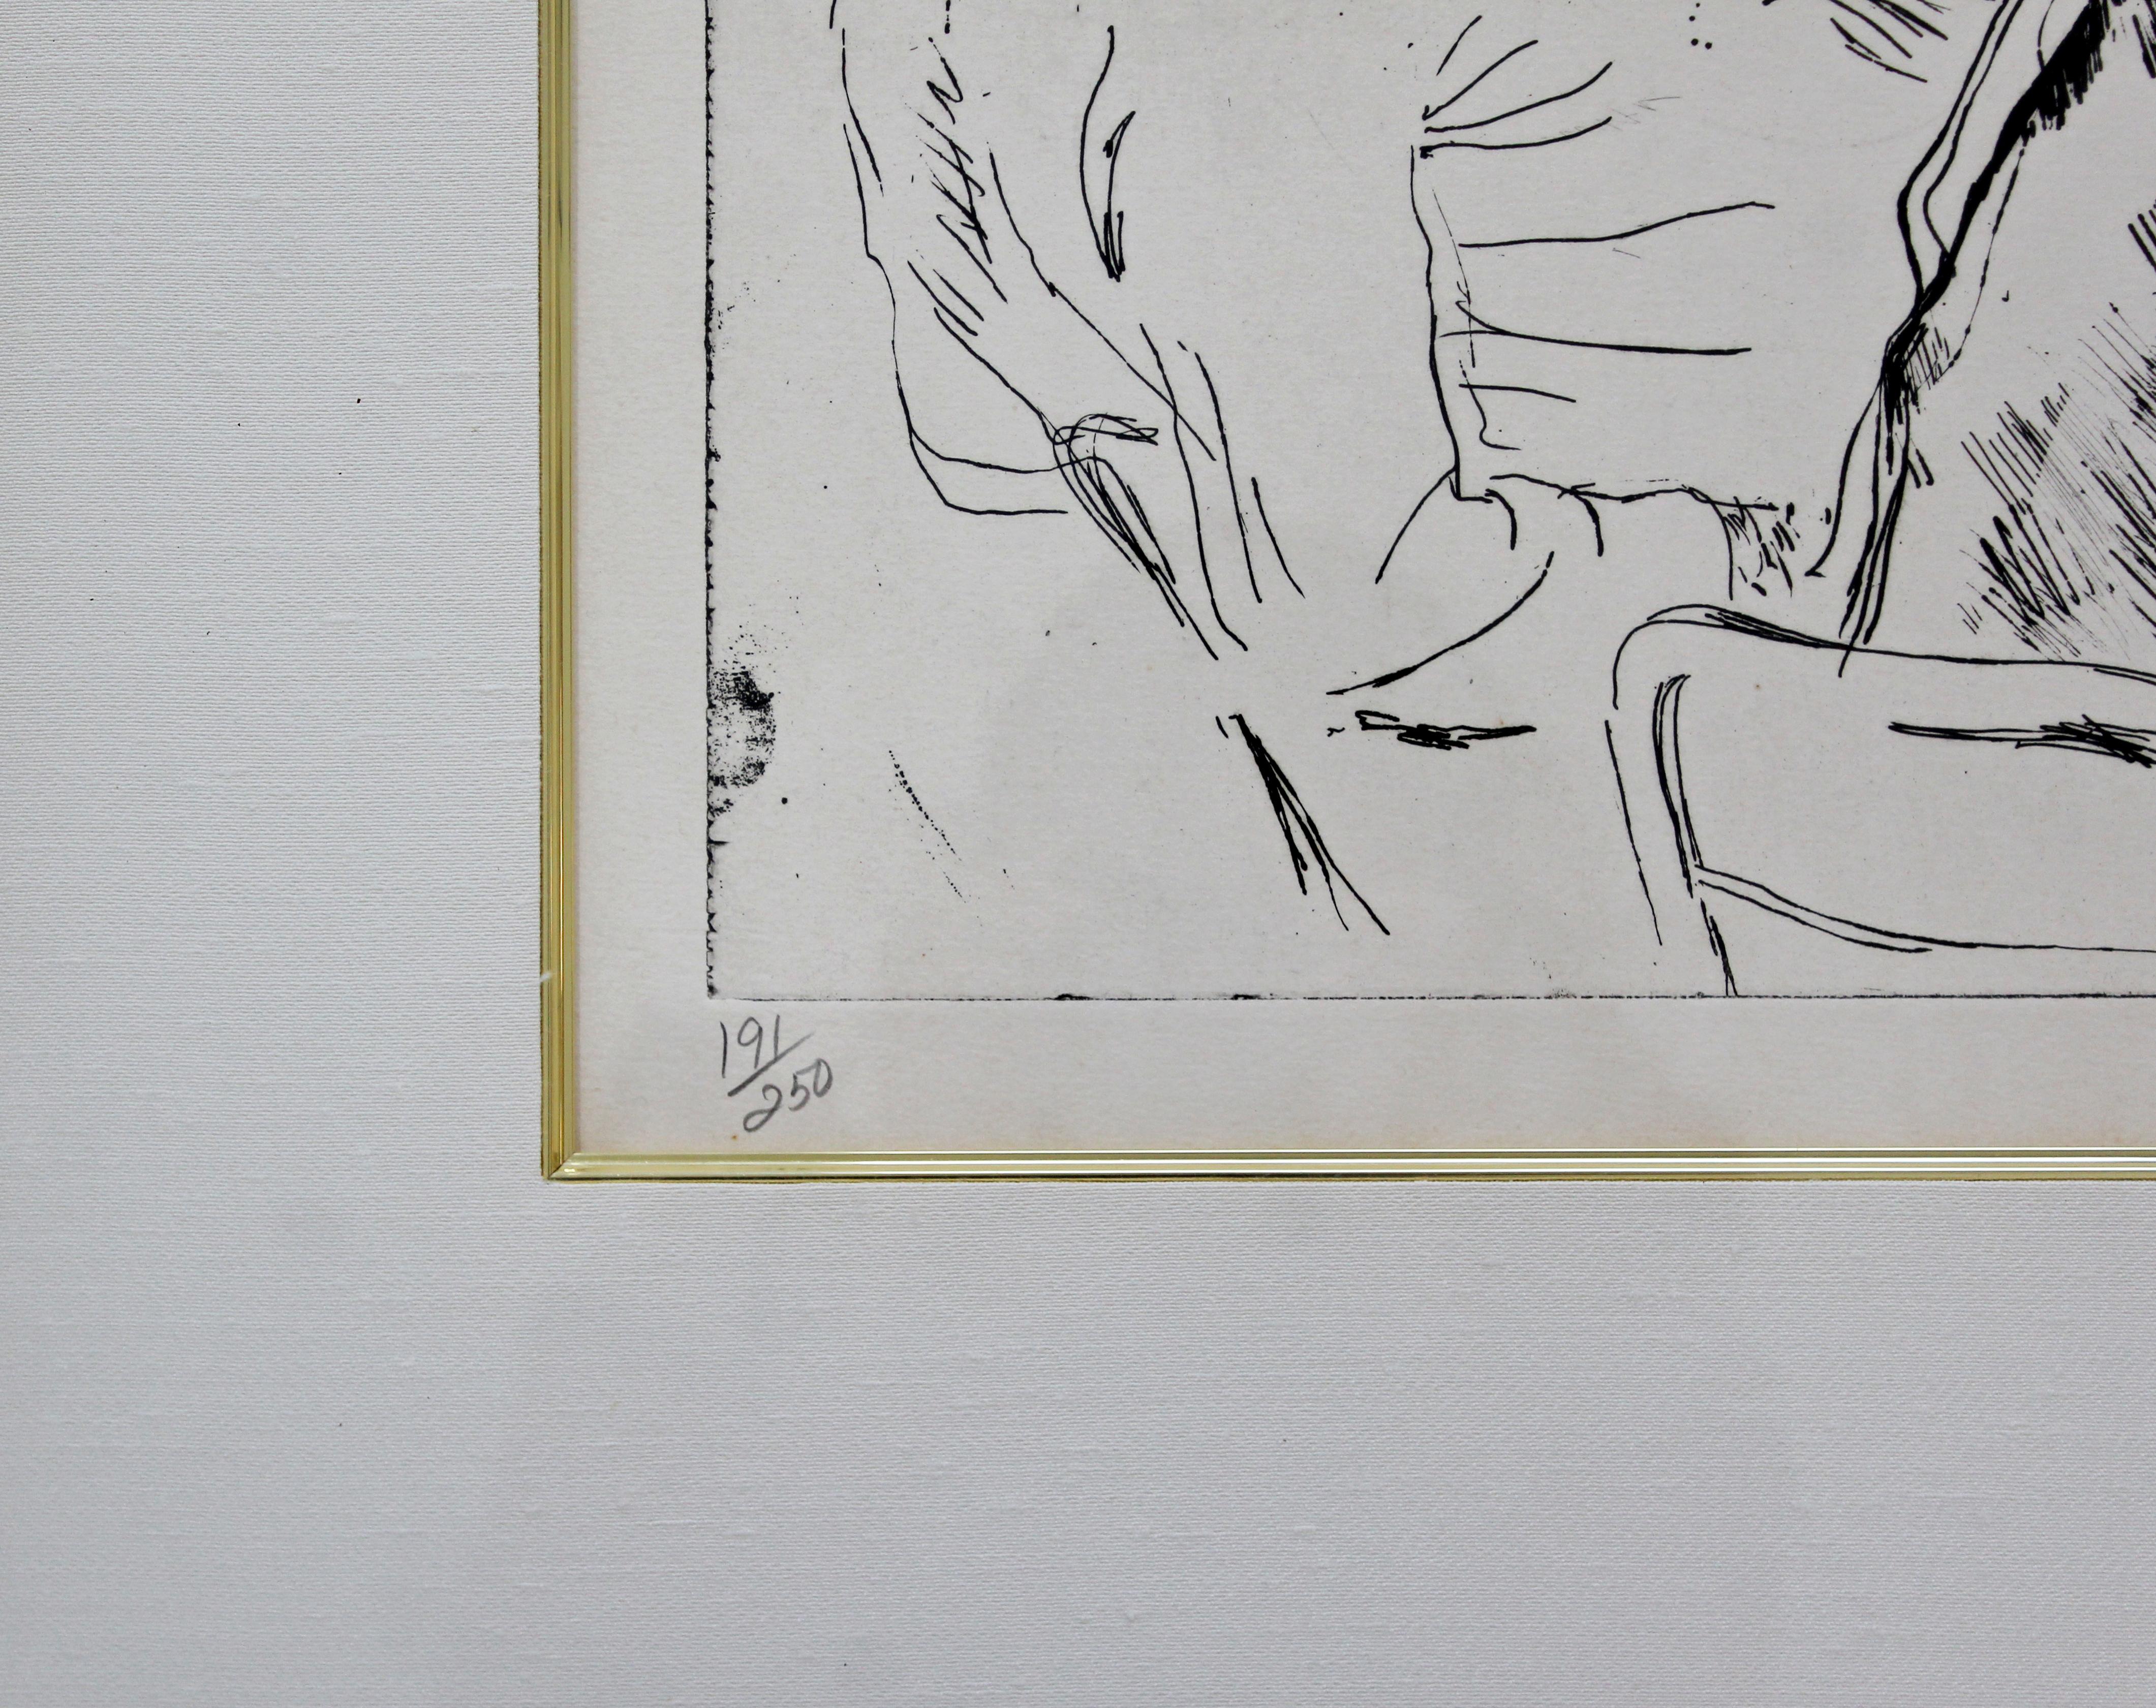 Paper Mid-Century Modern Framed Game of Life Etching Signed Leroy Neiman 191/250